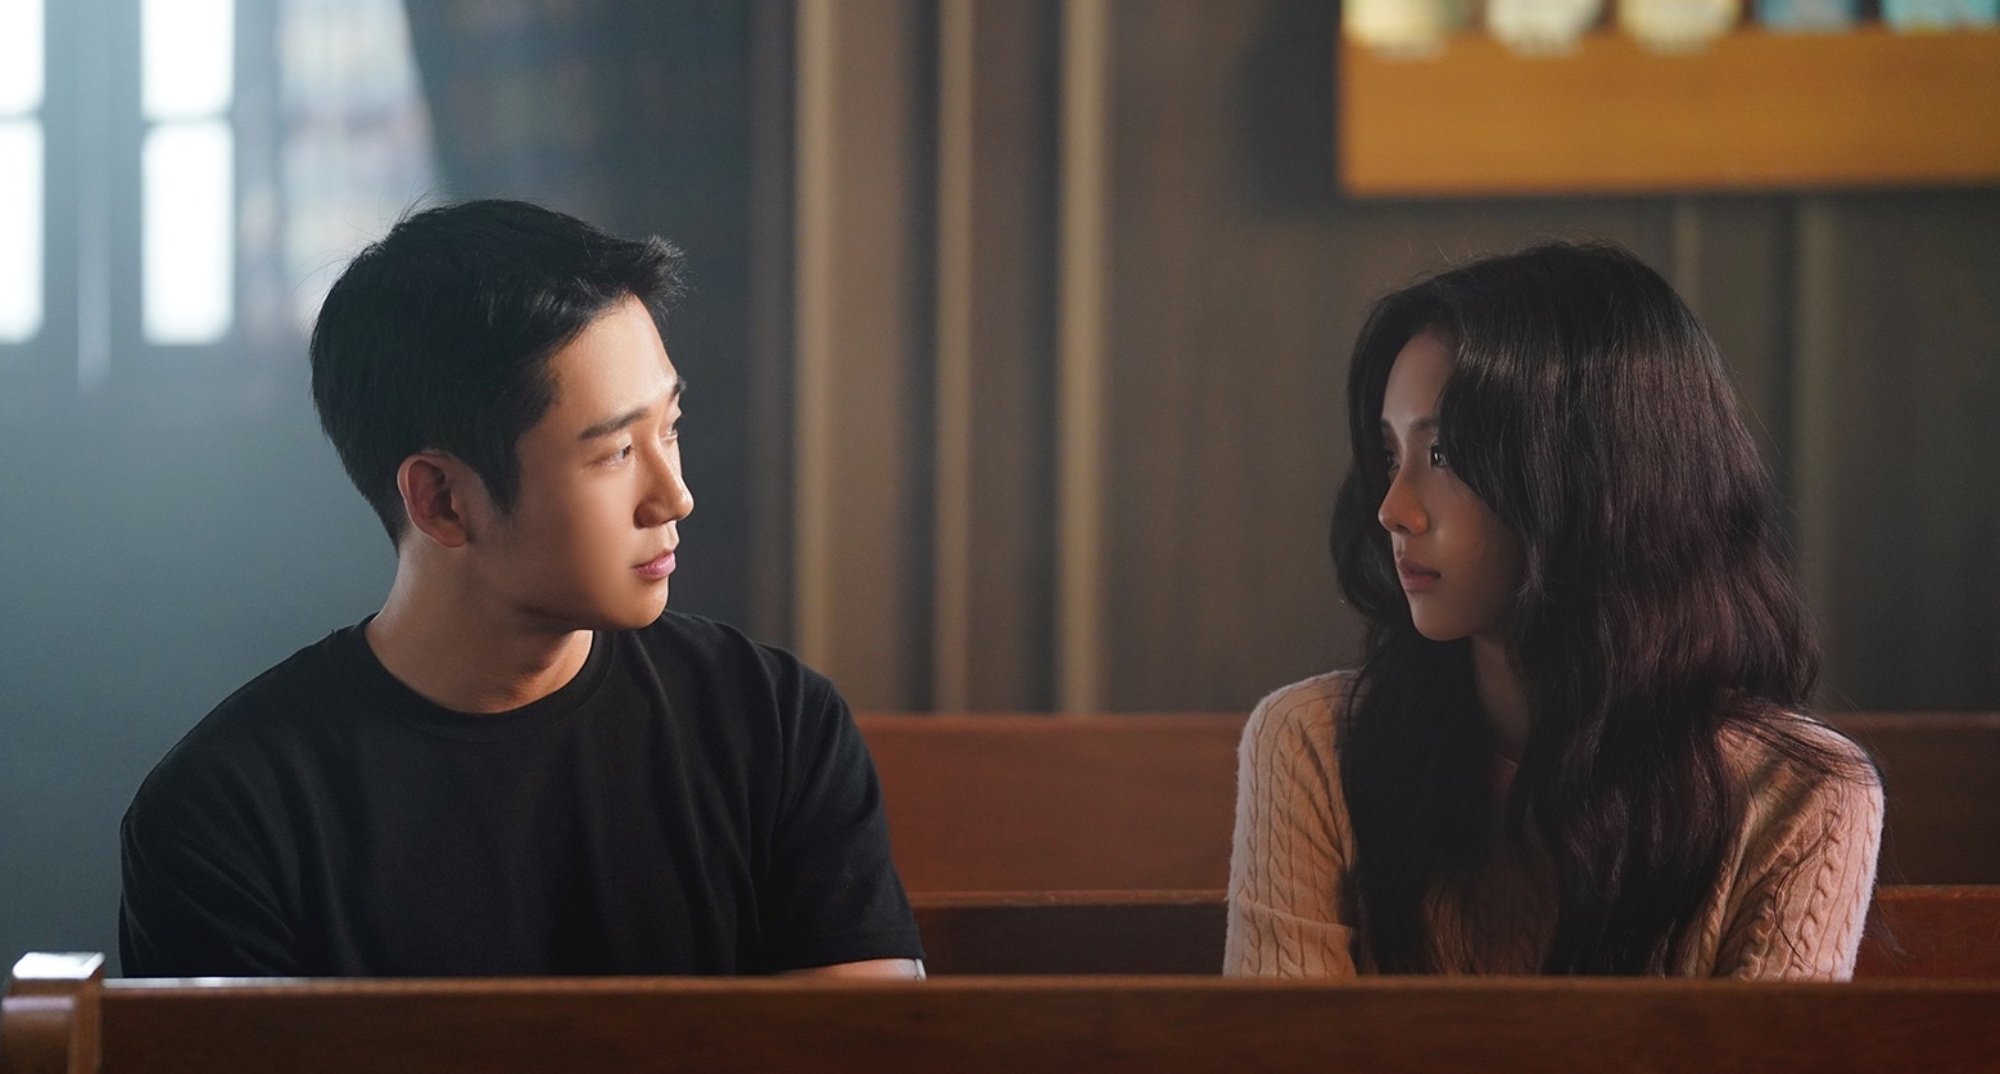 Actor Jung Hae-in and Jisoo in 'Snowdrop' K-drama staring at each other in church.